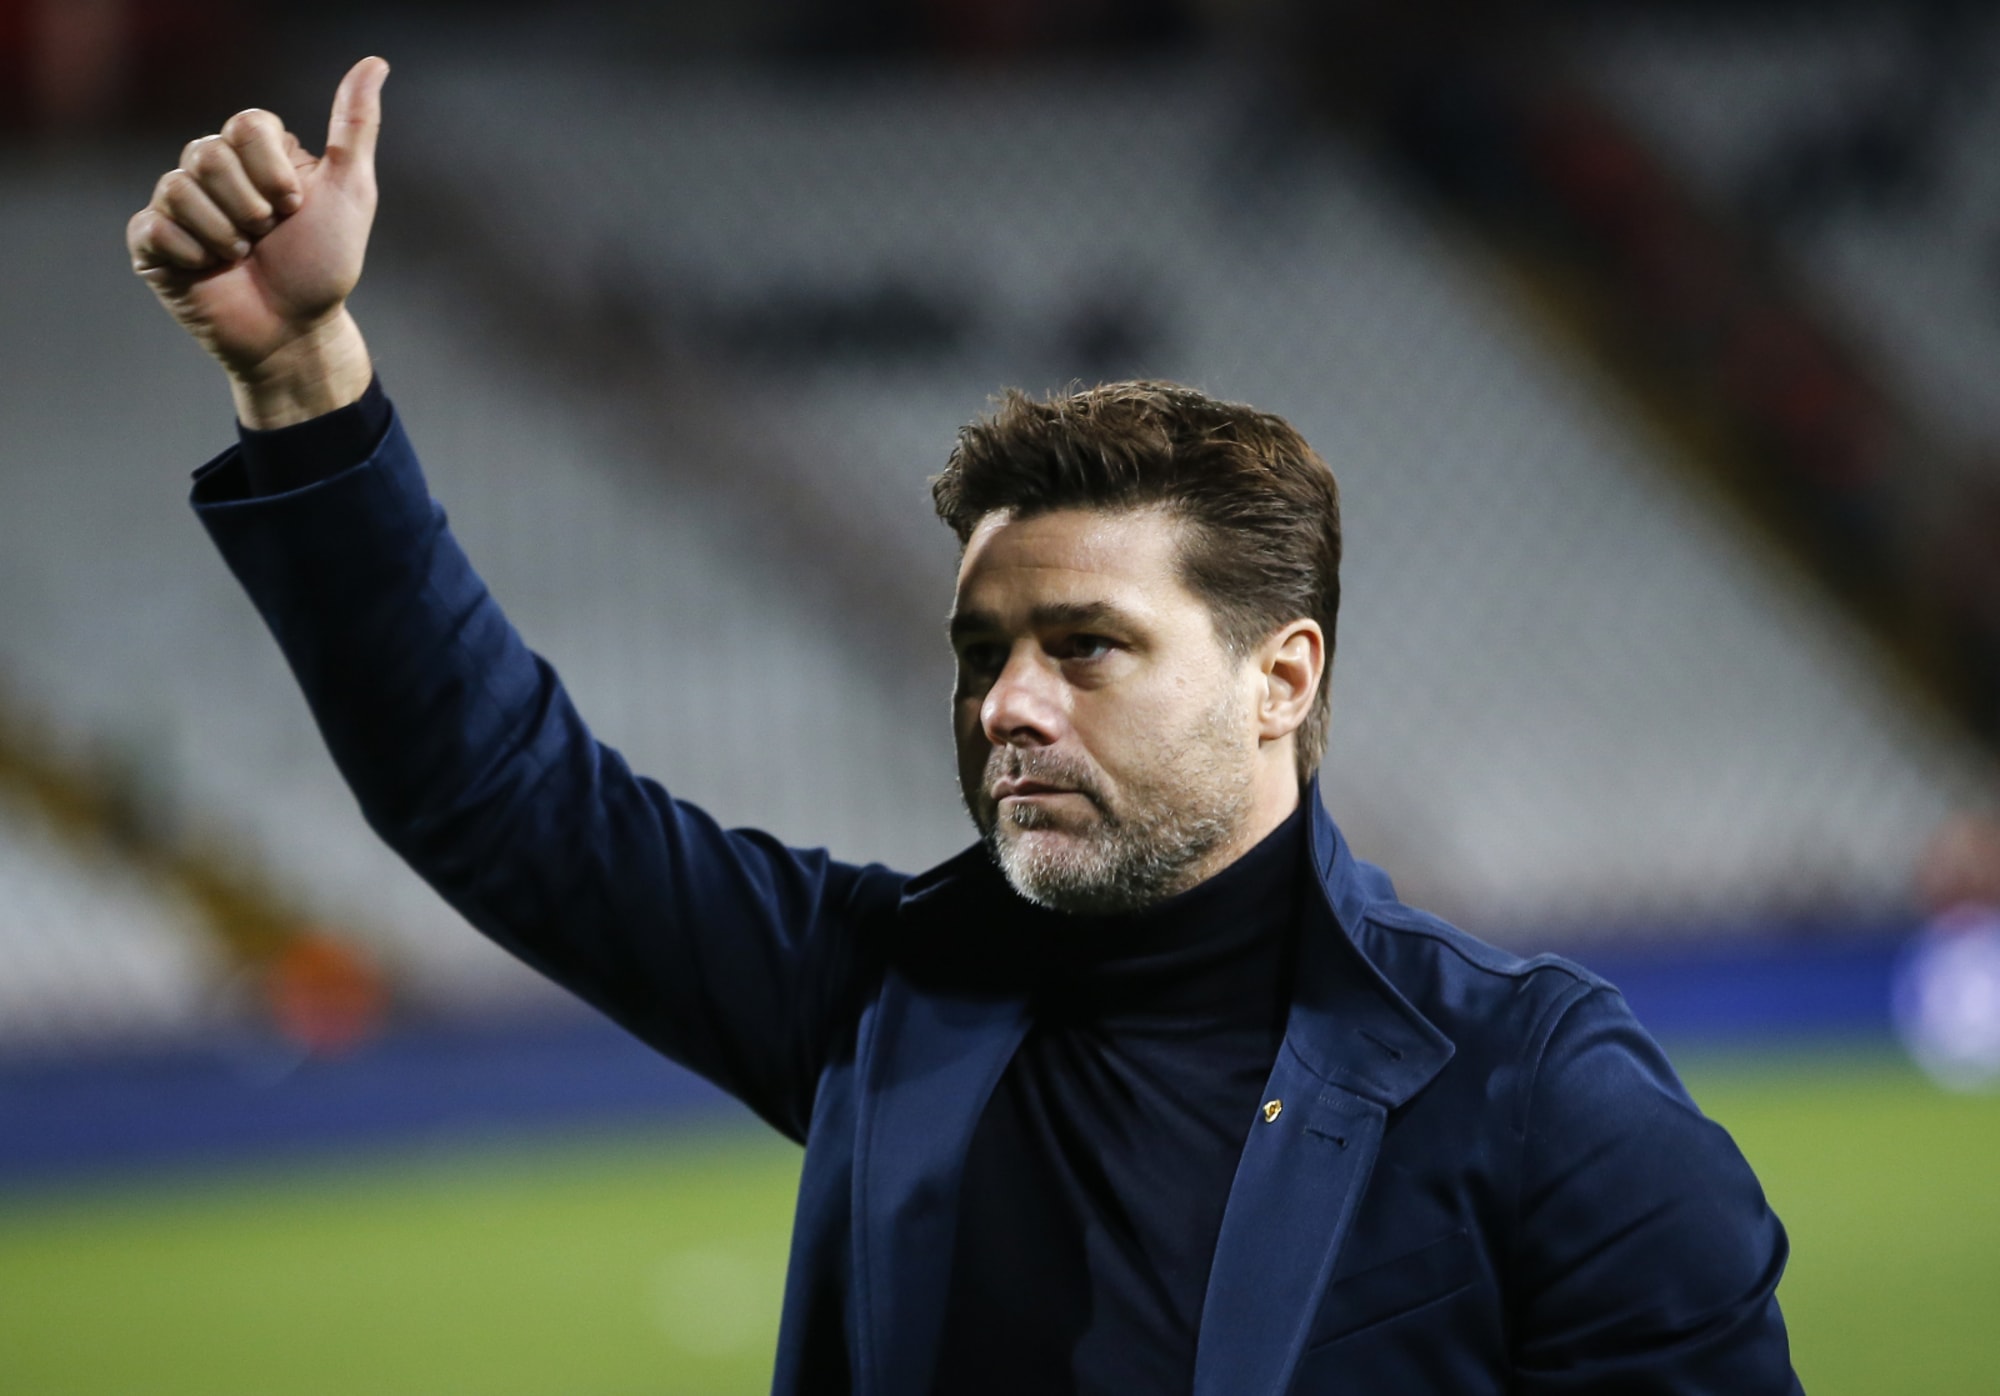 Pochettino has said he would be open to offers Everton should be one